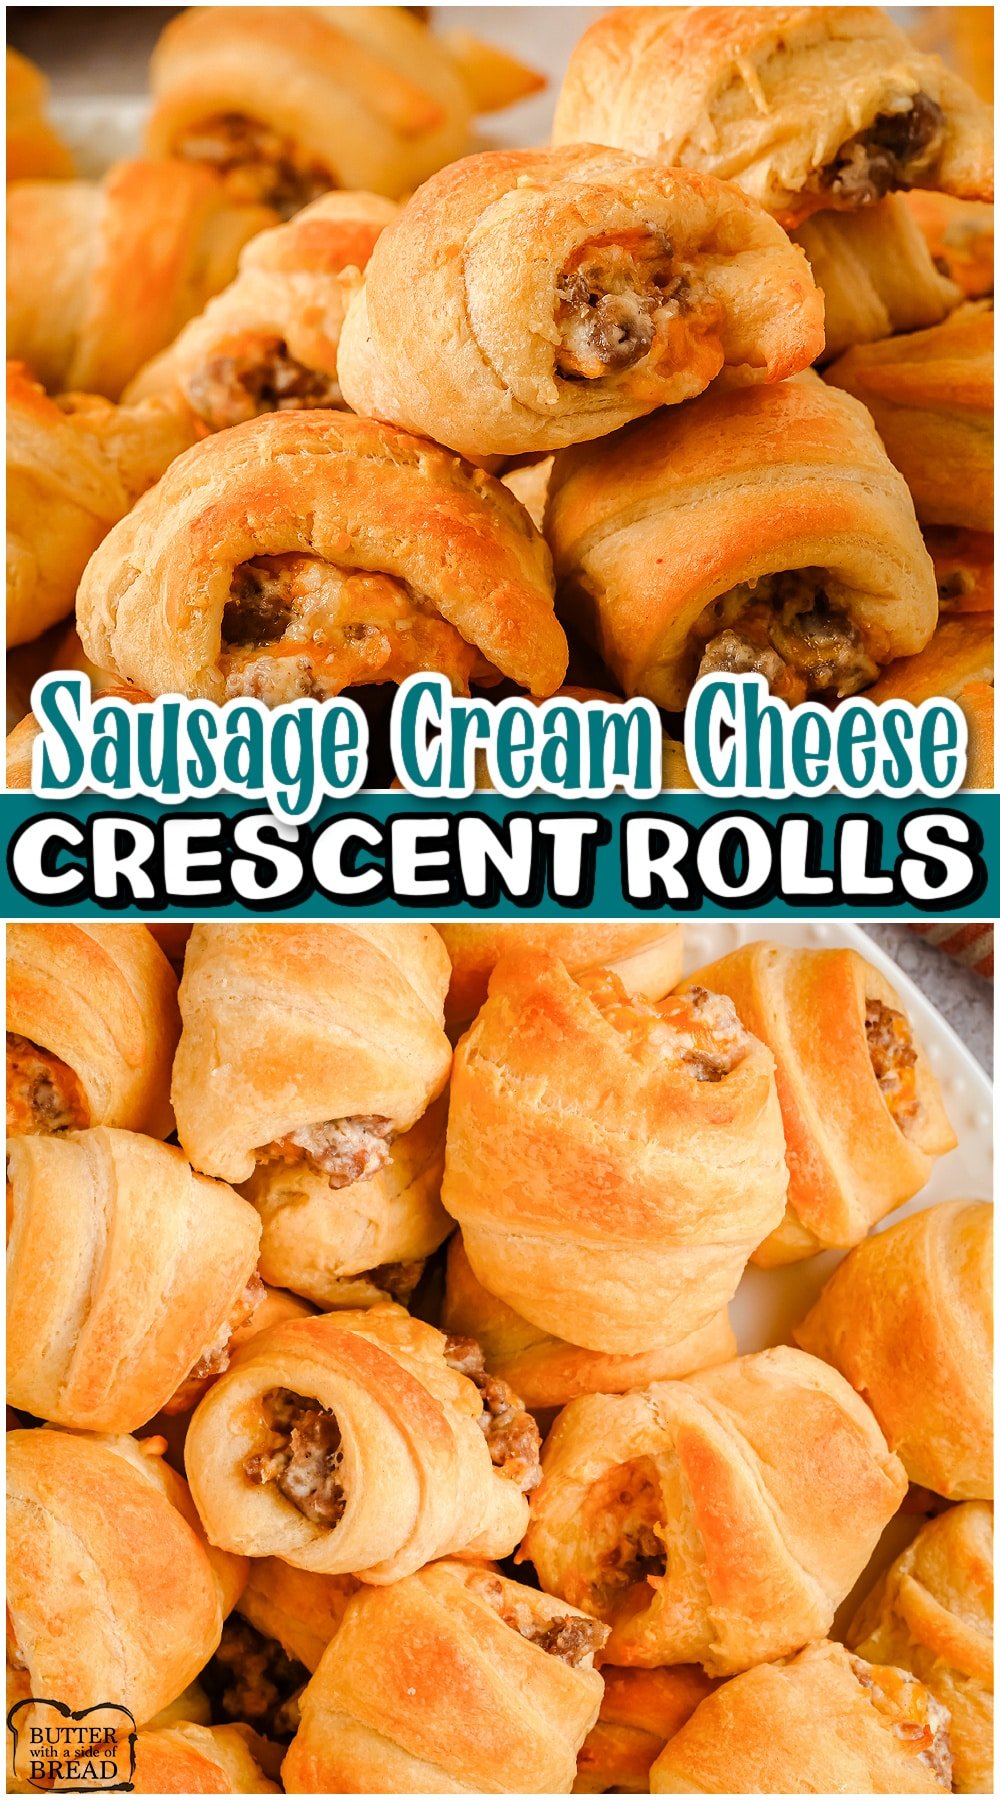 Sausage Crescent Rolls are a simple appetizer that your whole family will enjoy! Sausage cream cheese crescent rolls made easy with 4 ingredients & is a perfect holiday hors d'oeuvres!